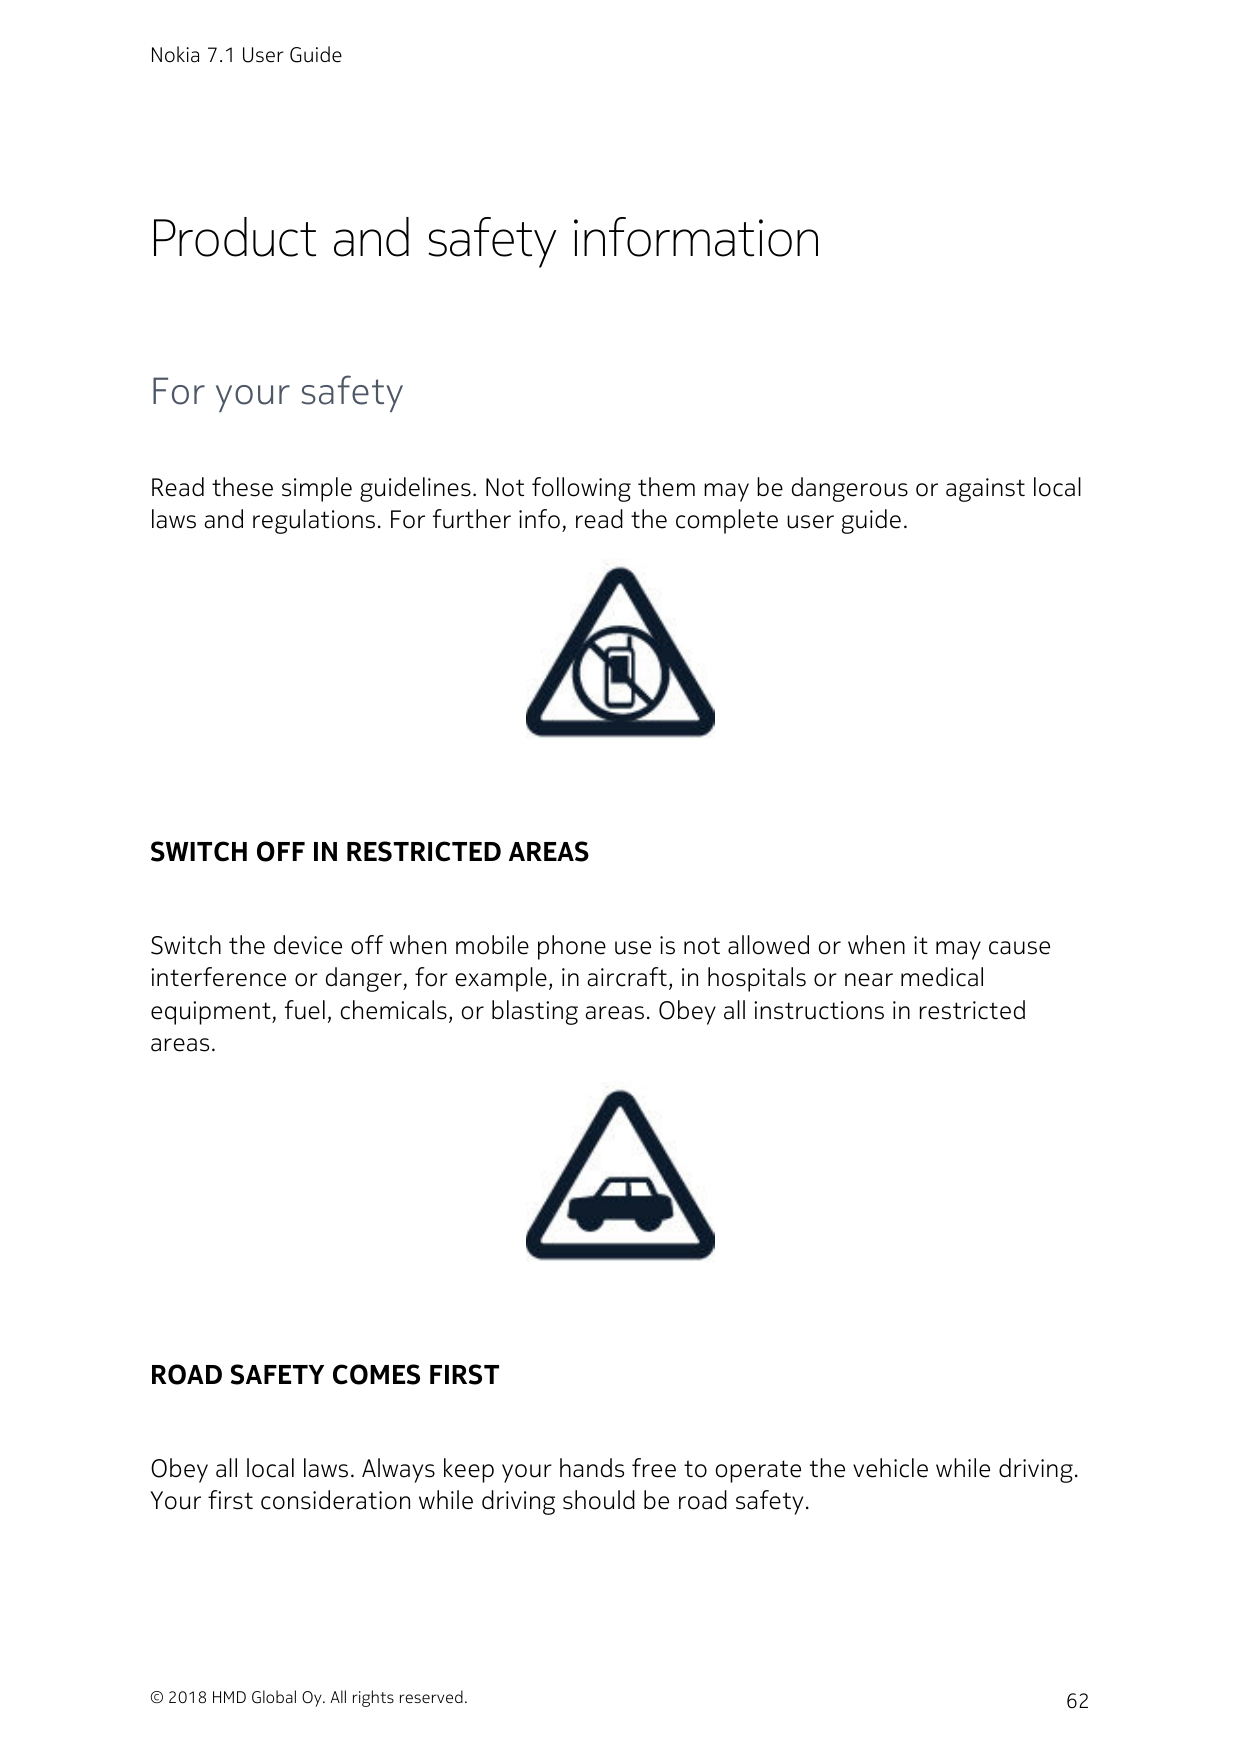 Nokia 7.1 User GuideProduct and safety informationFor your safetyRead these simple guidelines. Not following them may be dangero